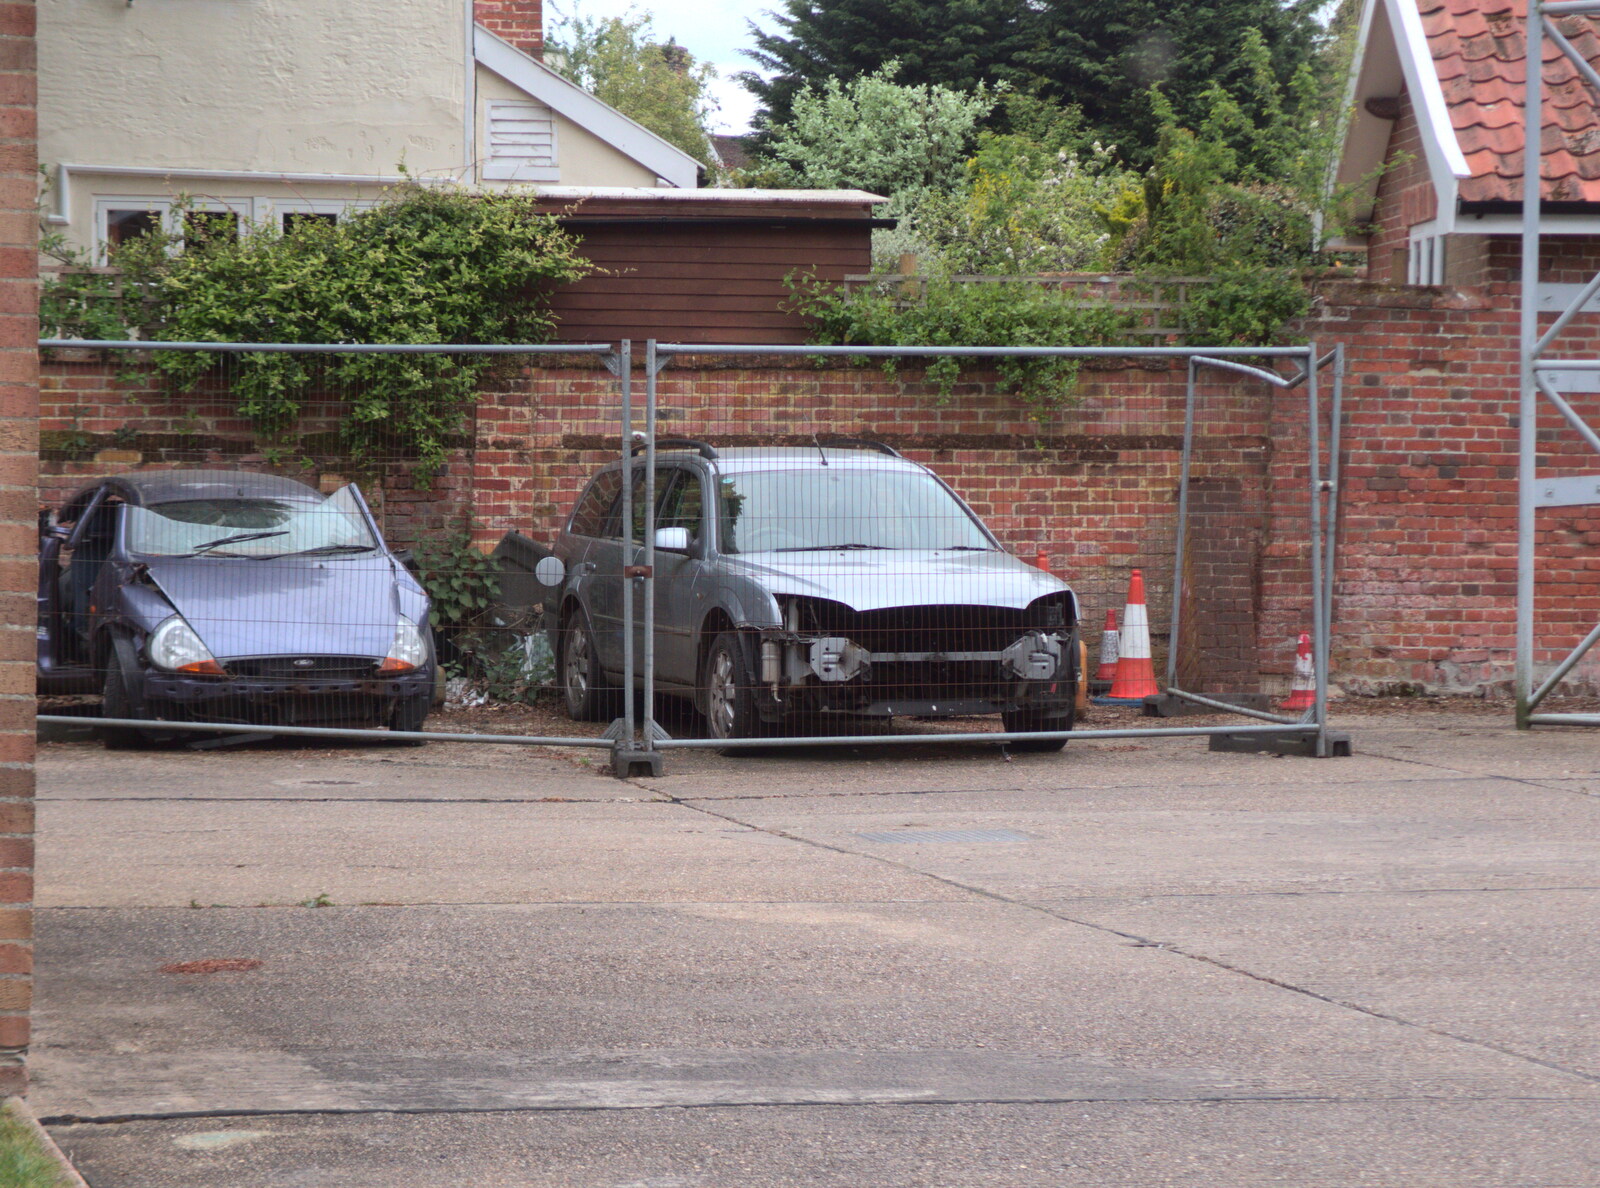 Practice cars behind the fire station in Eye from The Old Brickworks and a New Road, Hoxne and Eye, Suffolk - 26th May 2020